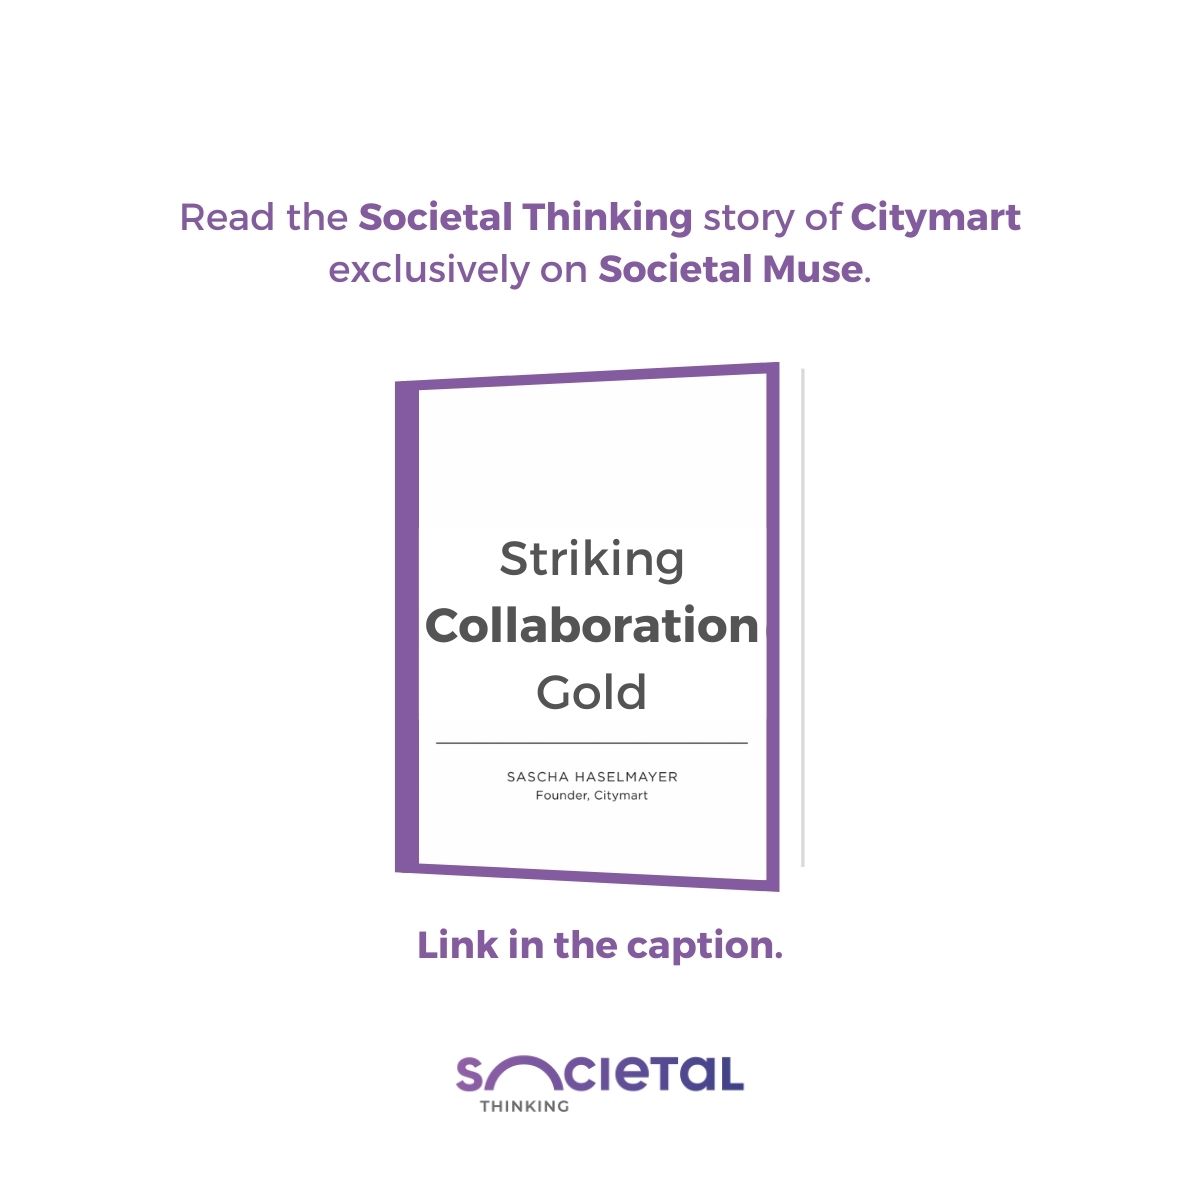 Read the Societal Thinking story of @CitymartTeam exclusively on Societal Muse here:
bit.ly/smtcmart

#societalmuse #findyourmuse #societalthinking #socialimpact #socialinnovation #collaboration